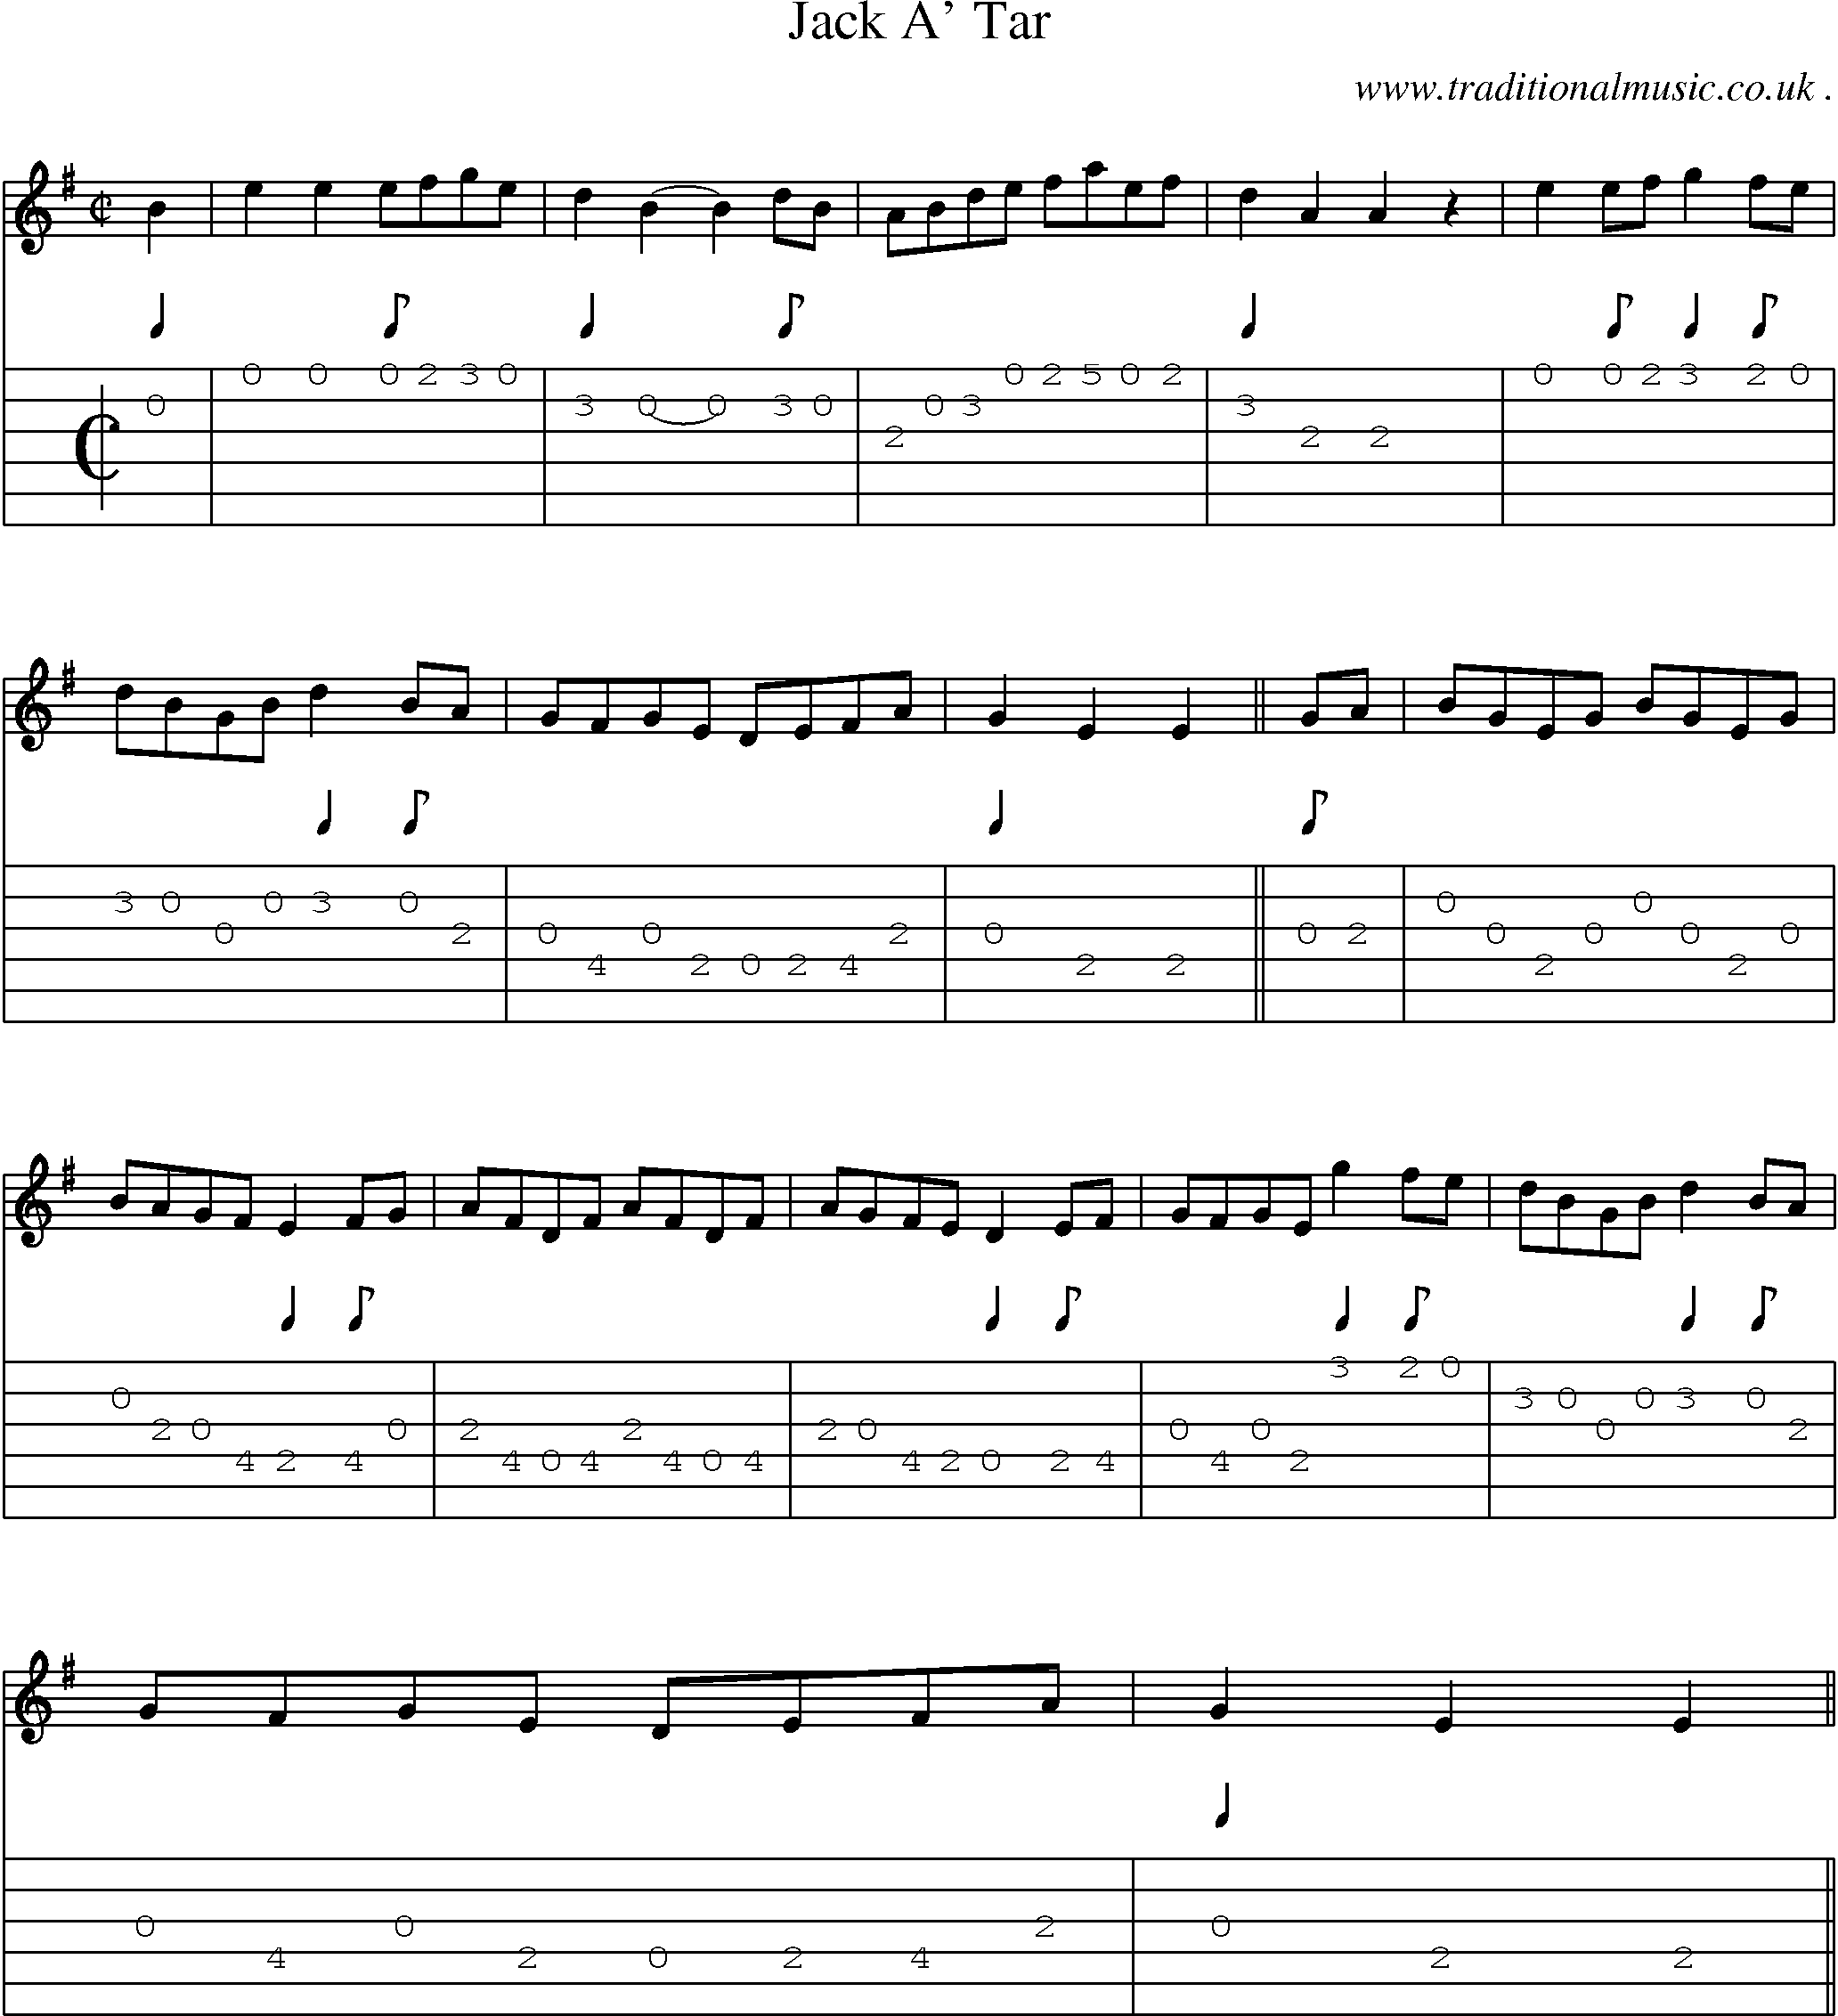 Sheet-music  score, Chords and Guitar Tabs for Jack A Tar